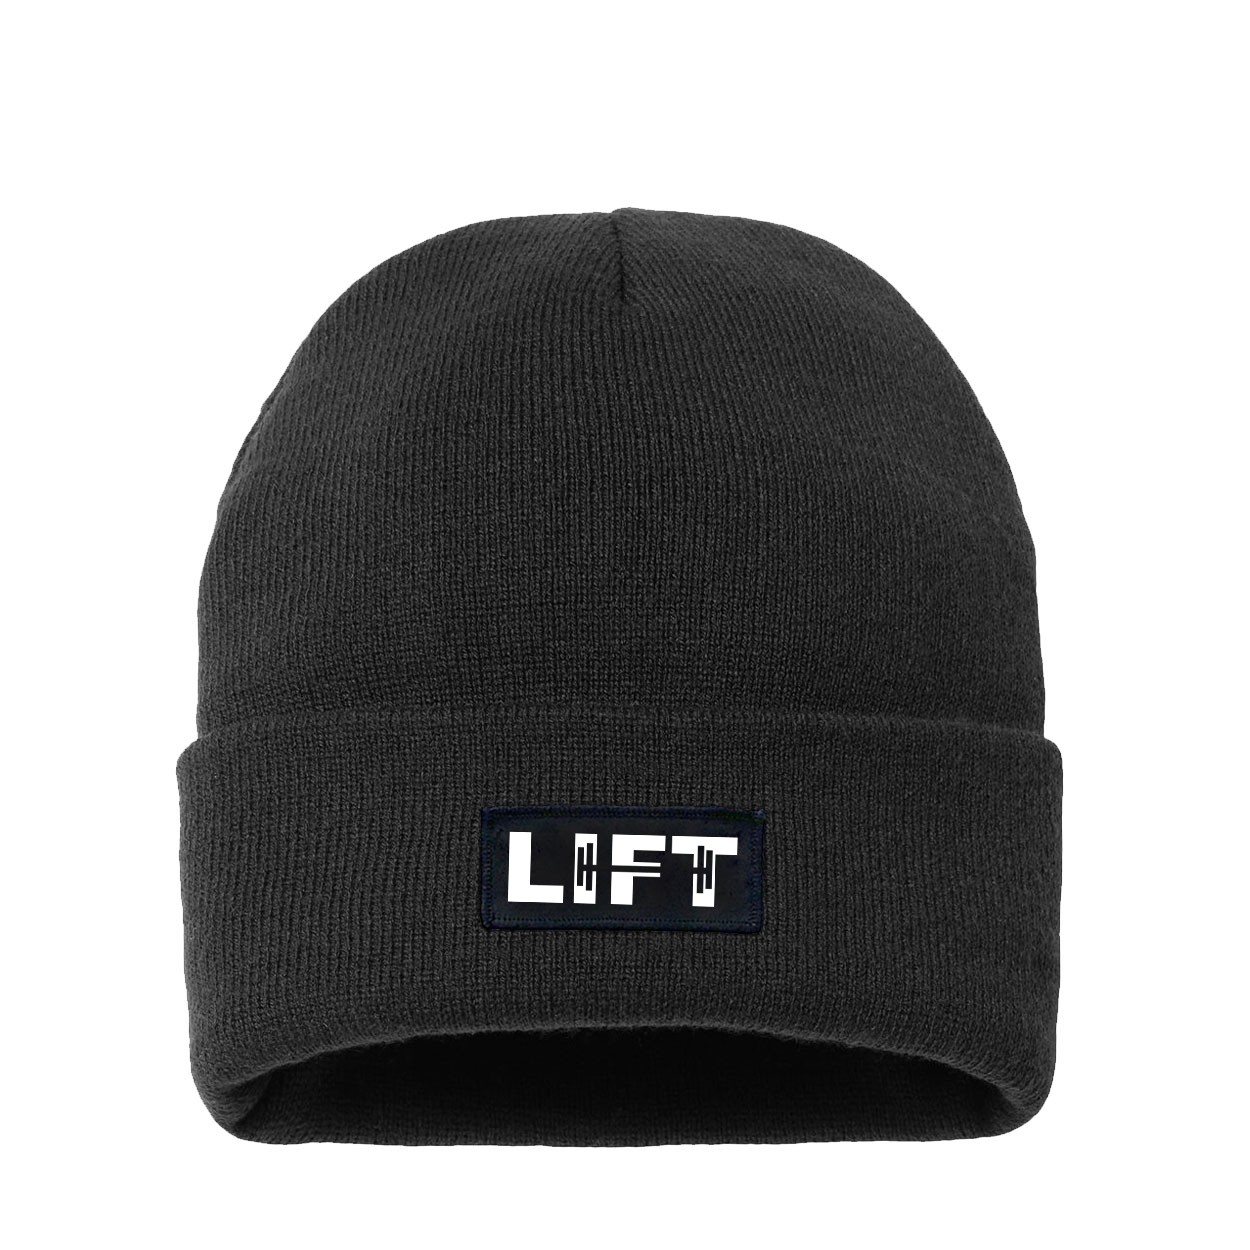 Lift Barbell Logo Night Out Woven Patch Night Out Sherpa Lined Cuffed Beanie Black (White Logo)